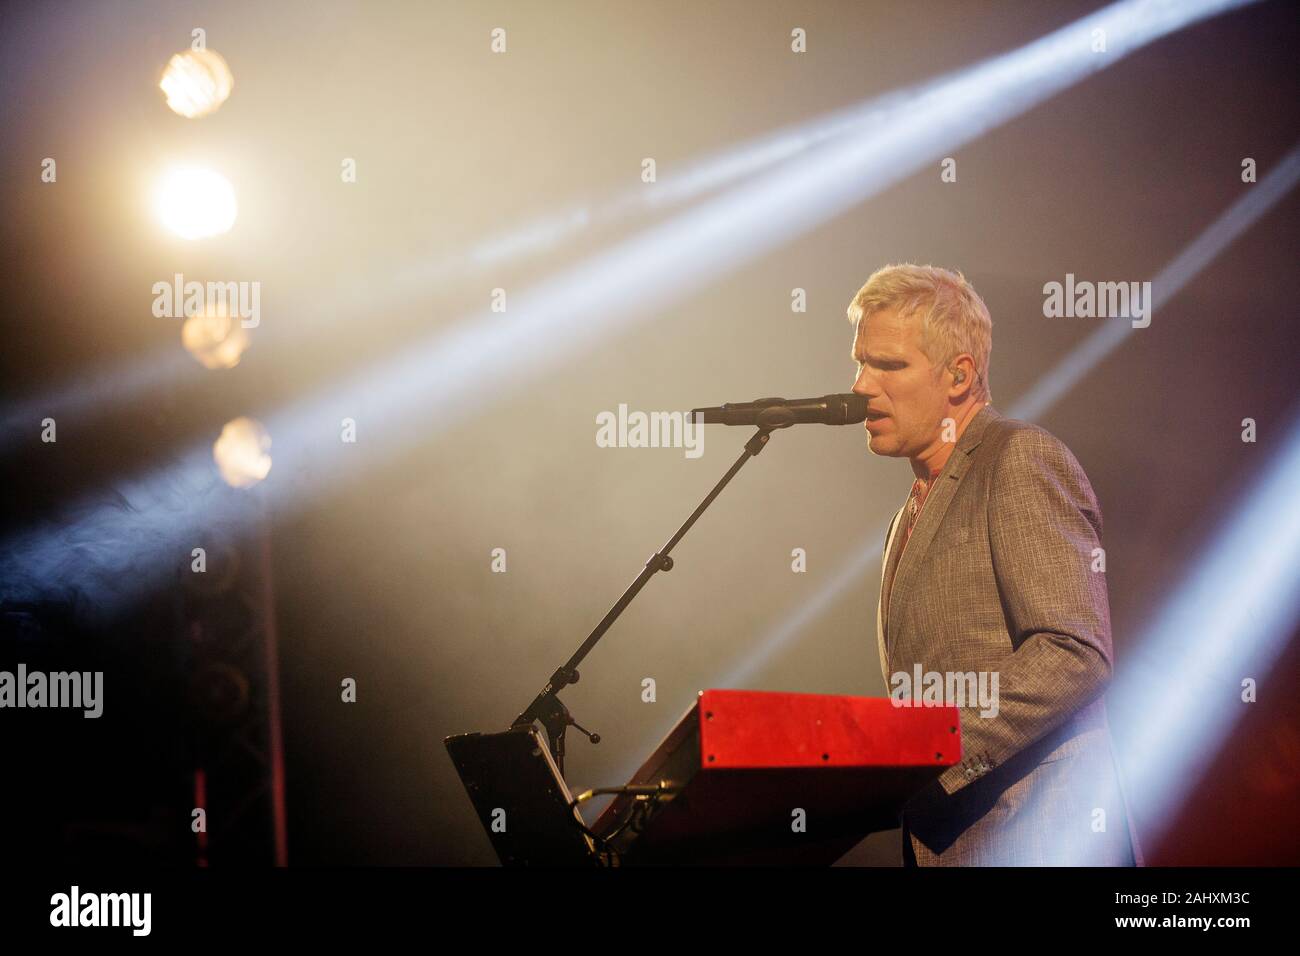 Vig, Denmark. 11th, July 2019. The Danish band Michael Learns to Rock performs a live concert during the Danish music festival Vig Festival 2019. Here singer and musician Jascha Richter is seen live on stage. (Photo credit: Gonzales Photo - Martin Faelt). Stock Photo